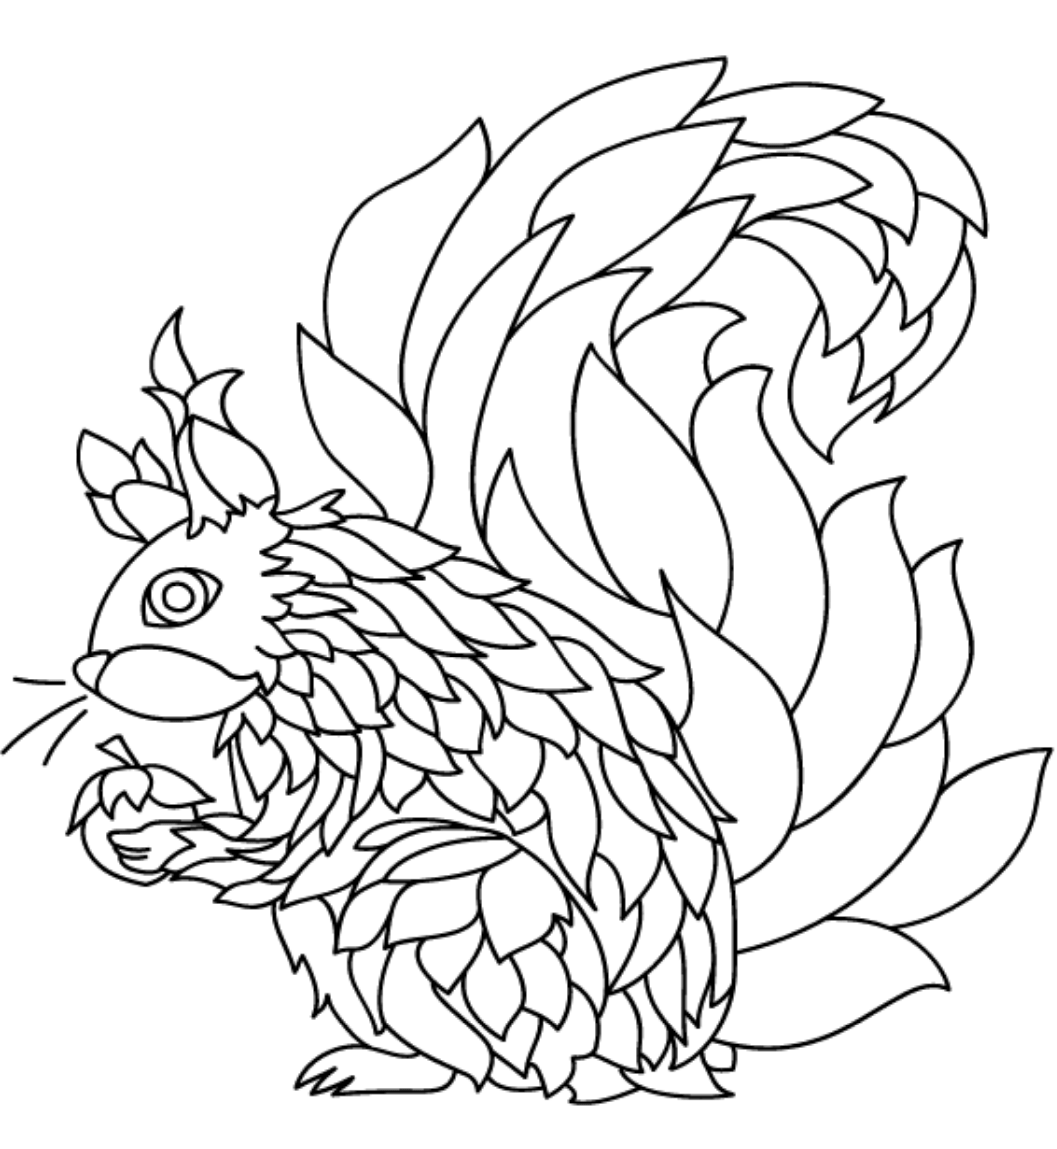 Cute Squirrel Coloring Page - Free Printable Coloring Pages for Kids